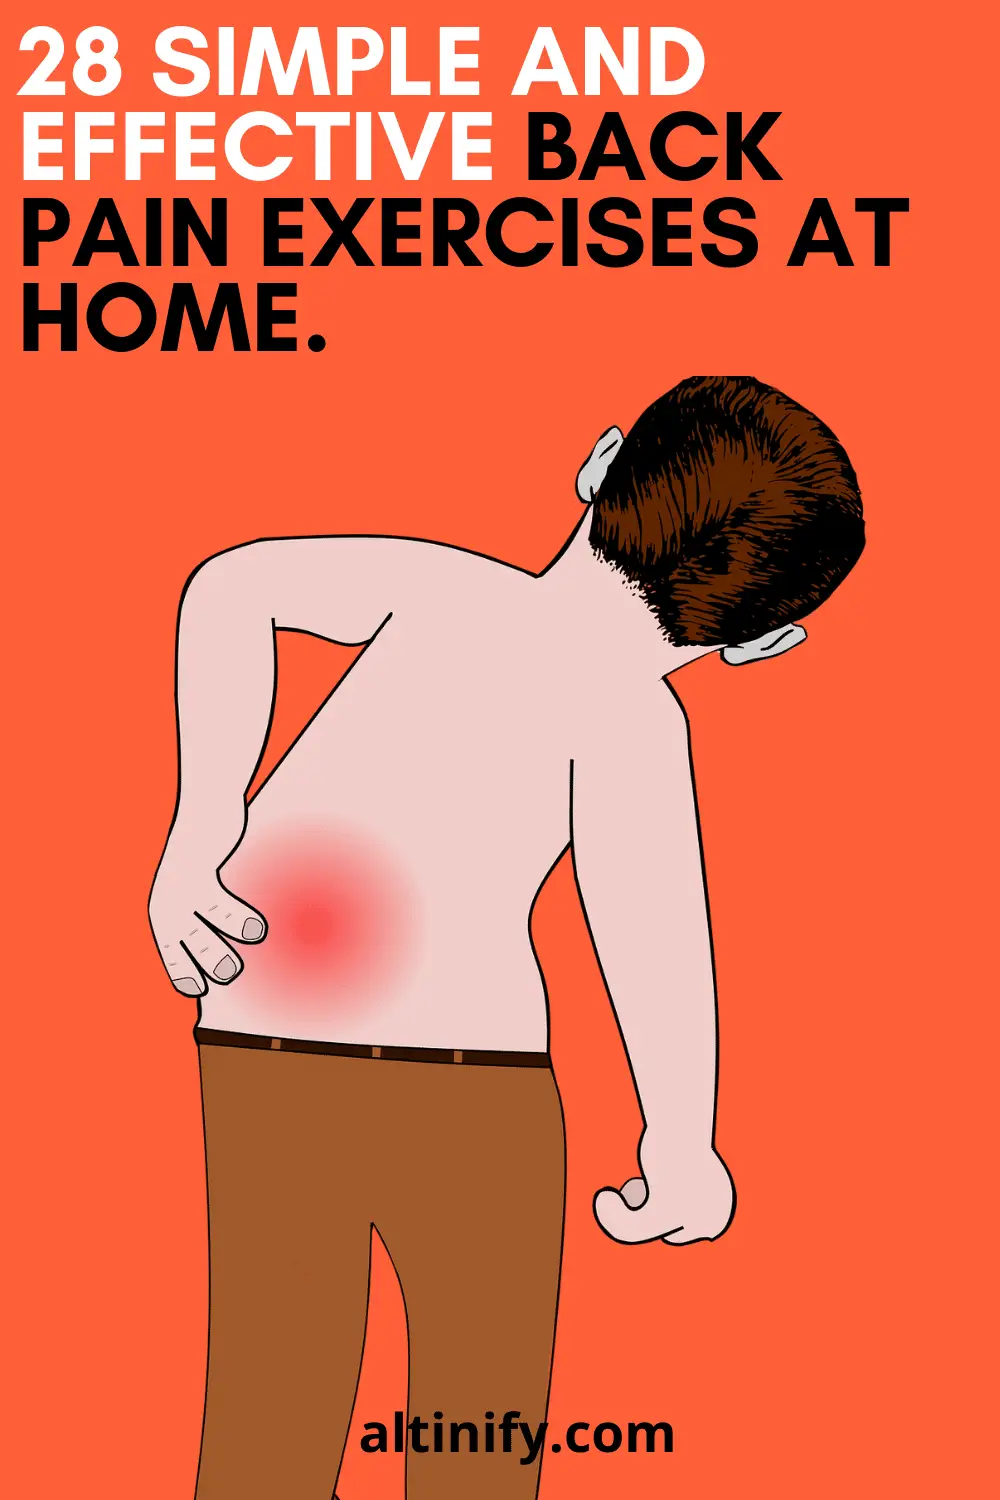 28 Simple And Effective Back Pain Exercises at Home